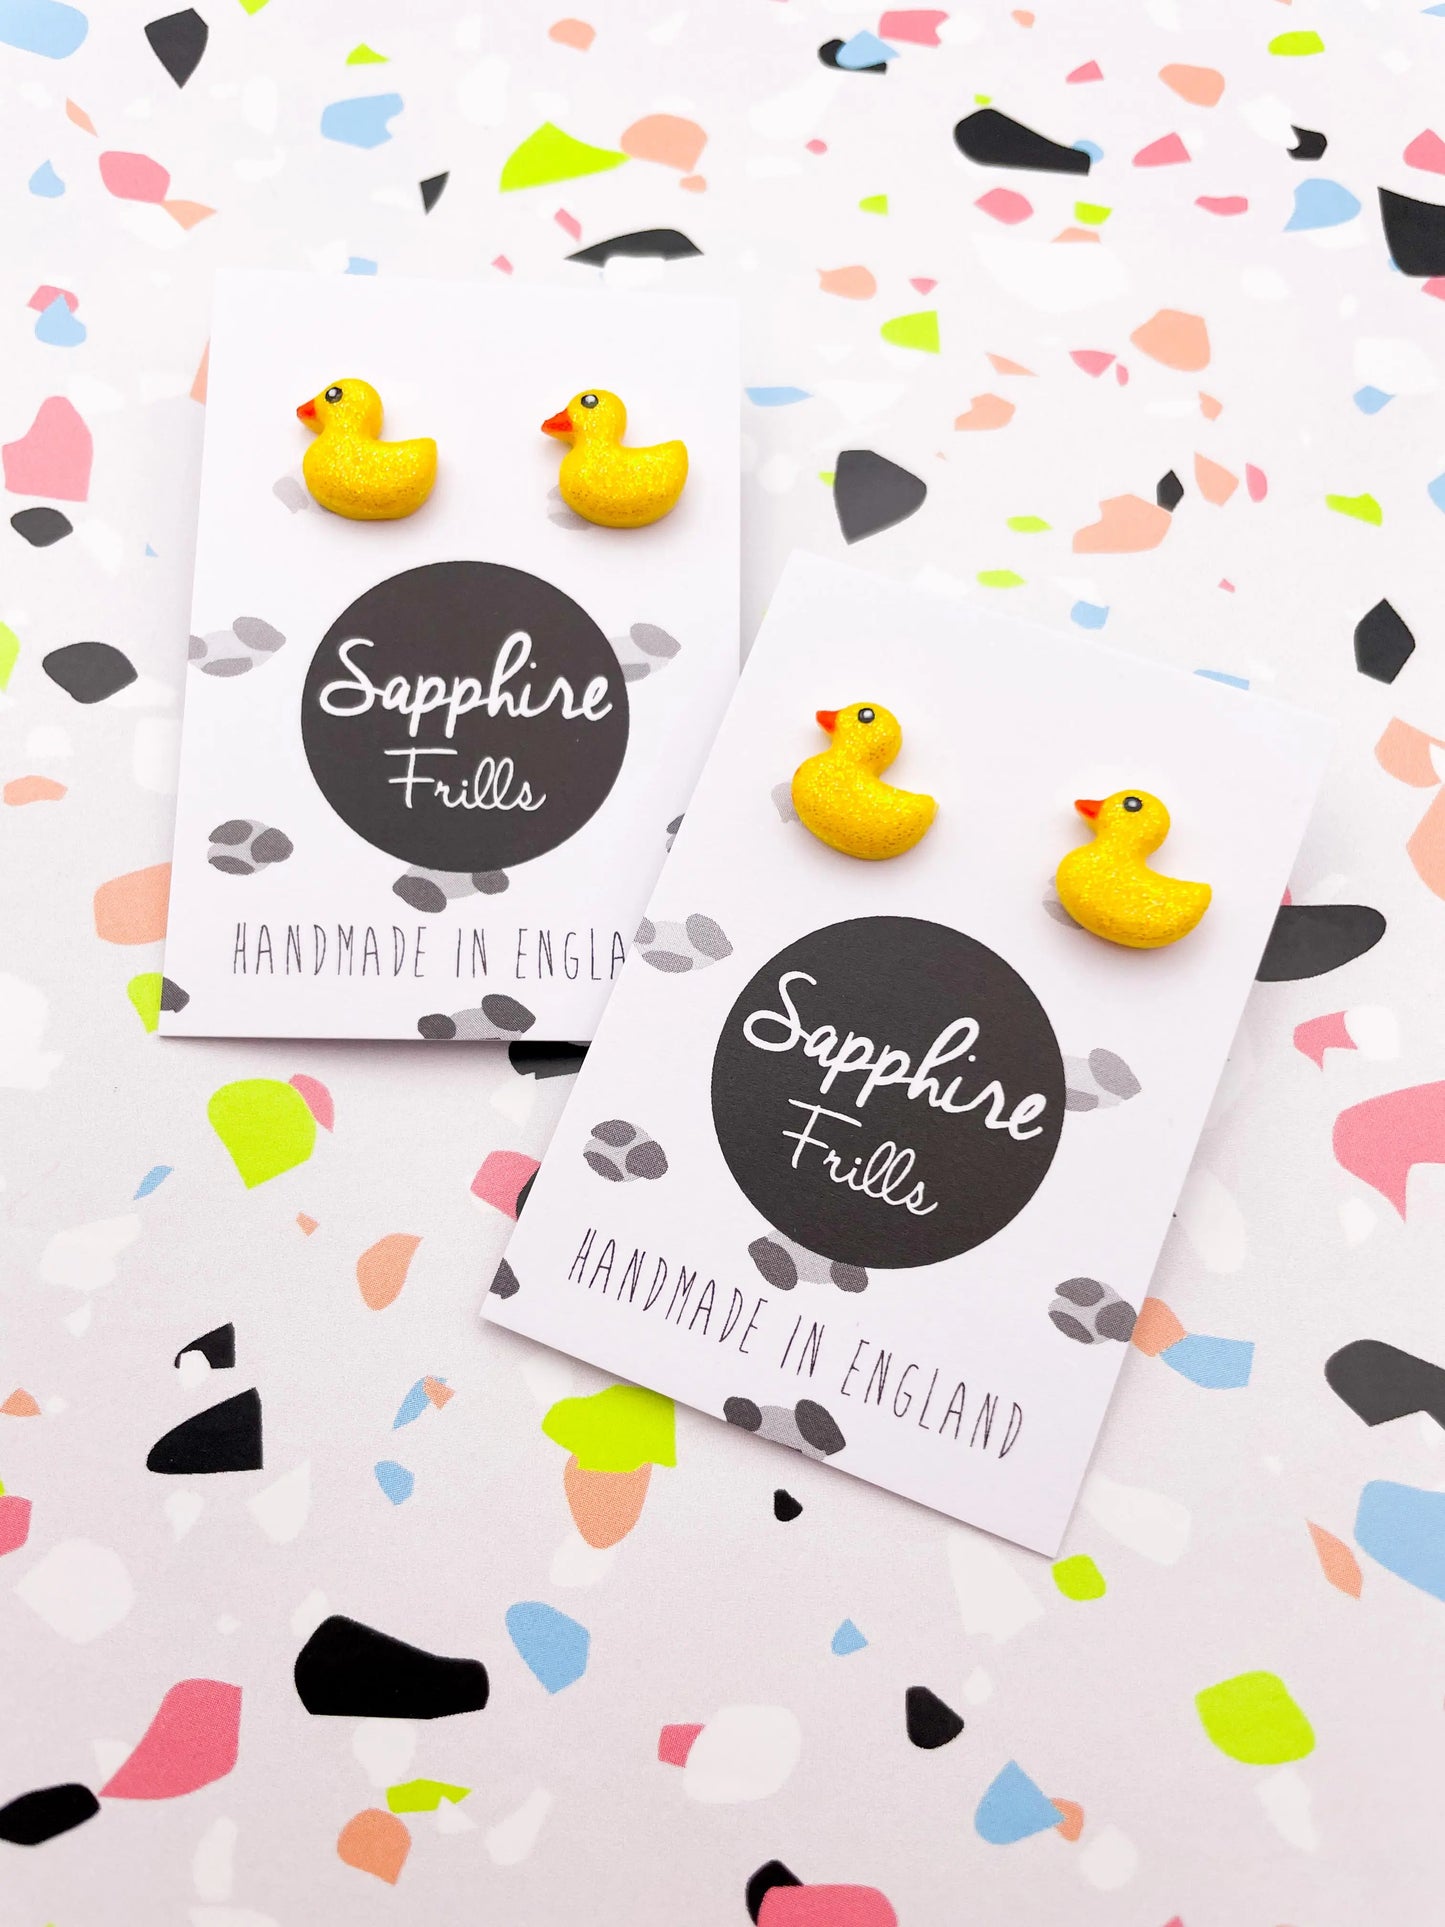 Small Yellow Glitter Duck Stud Earrings from Sapphire Frills